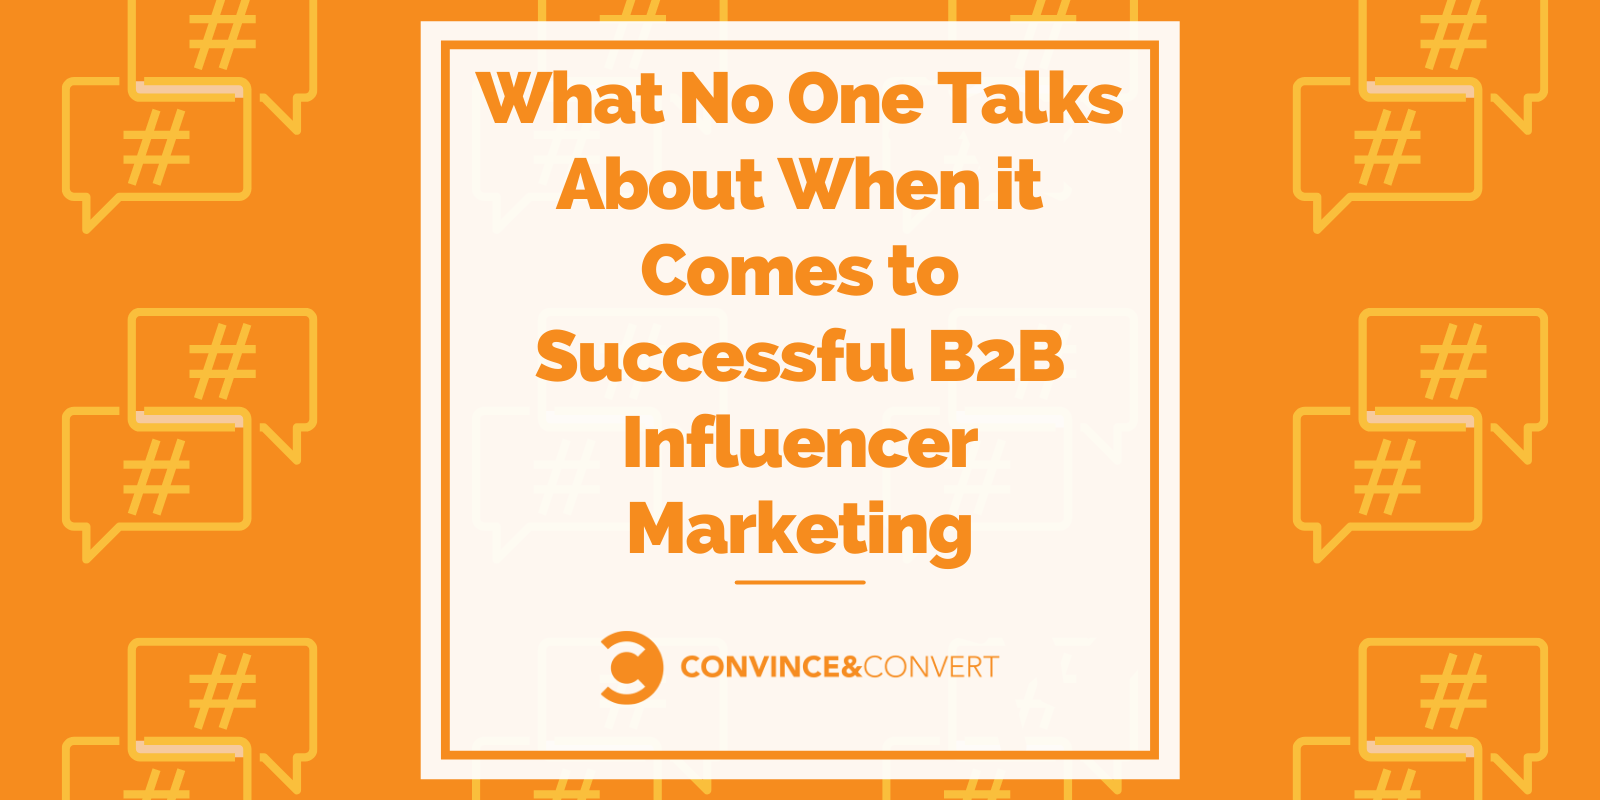 What No One Talks About When it Comes to Successful B2B Influencer Advertising and marketing